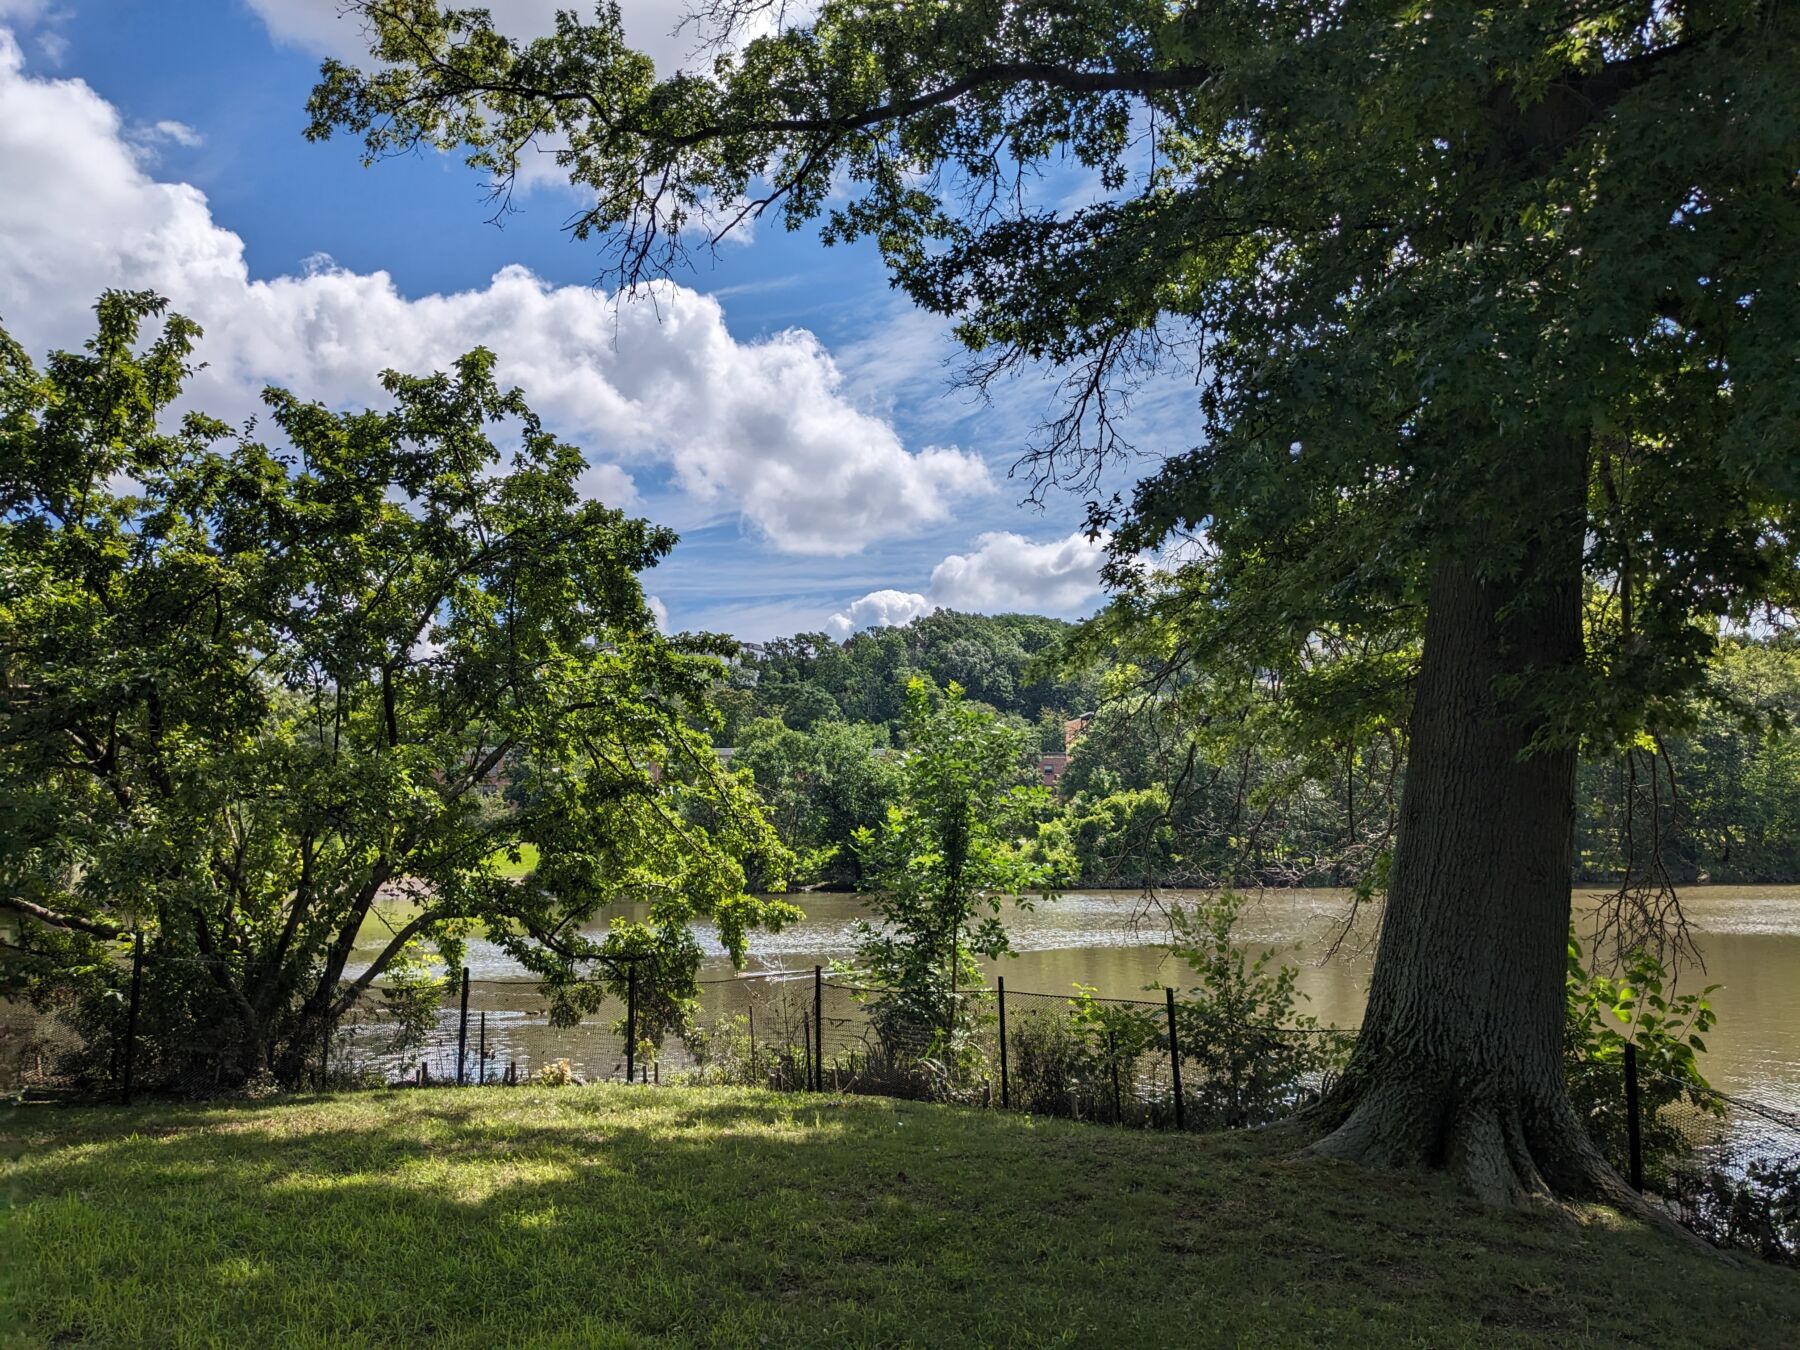 A nature scene at the edge of a river. A calm blue river flows in the distance. In the foreground, green grass and trees frame the bright blue sky.